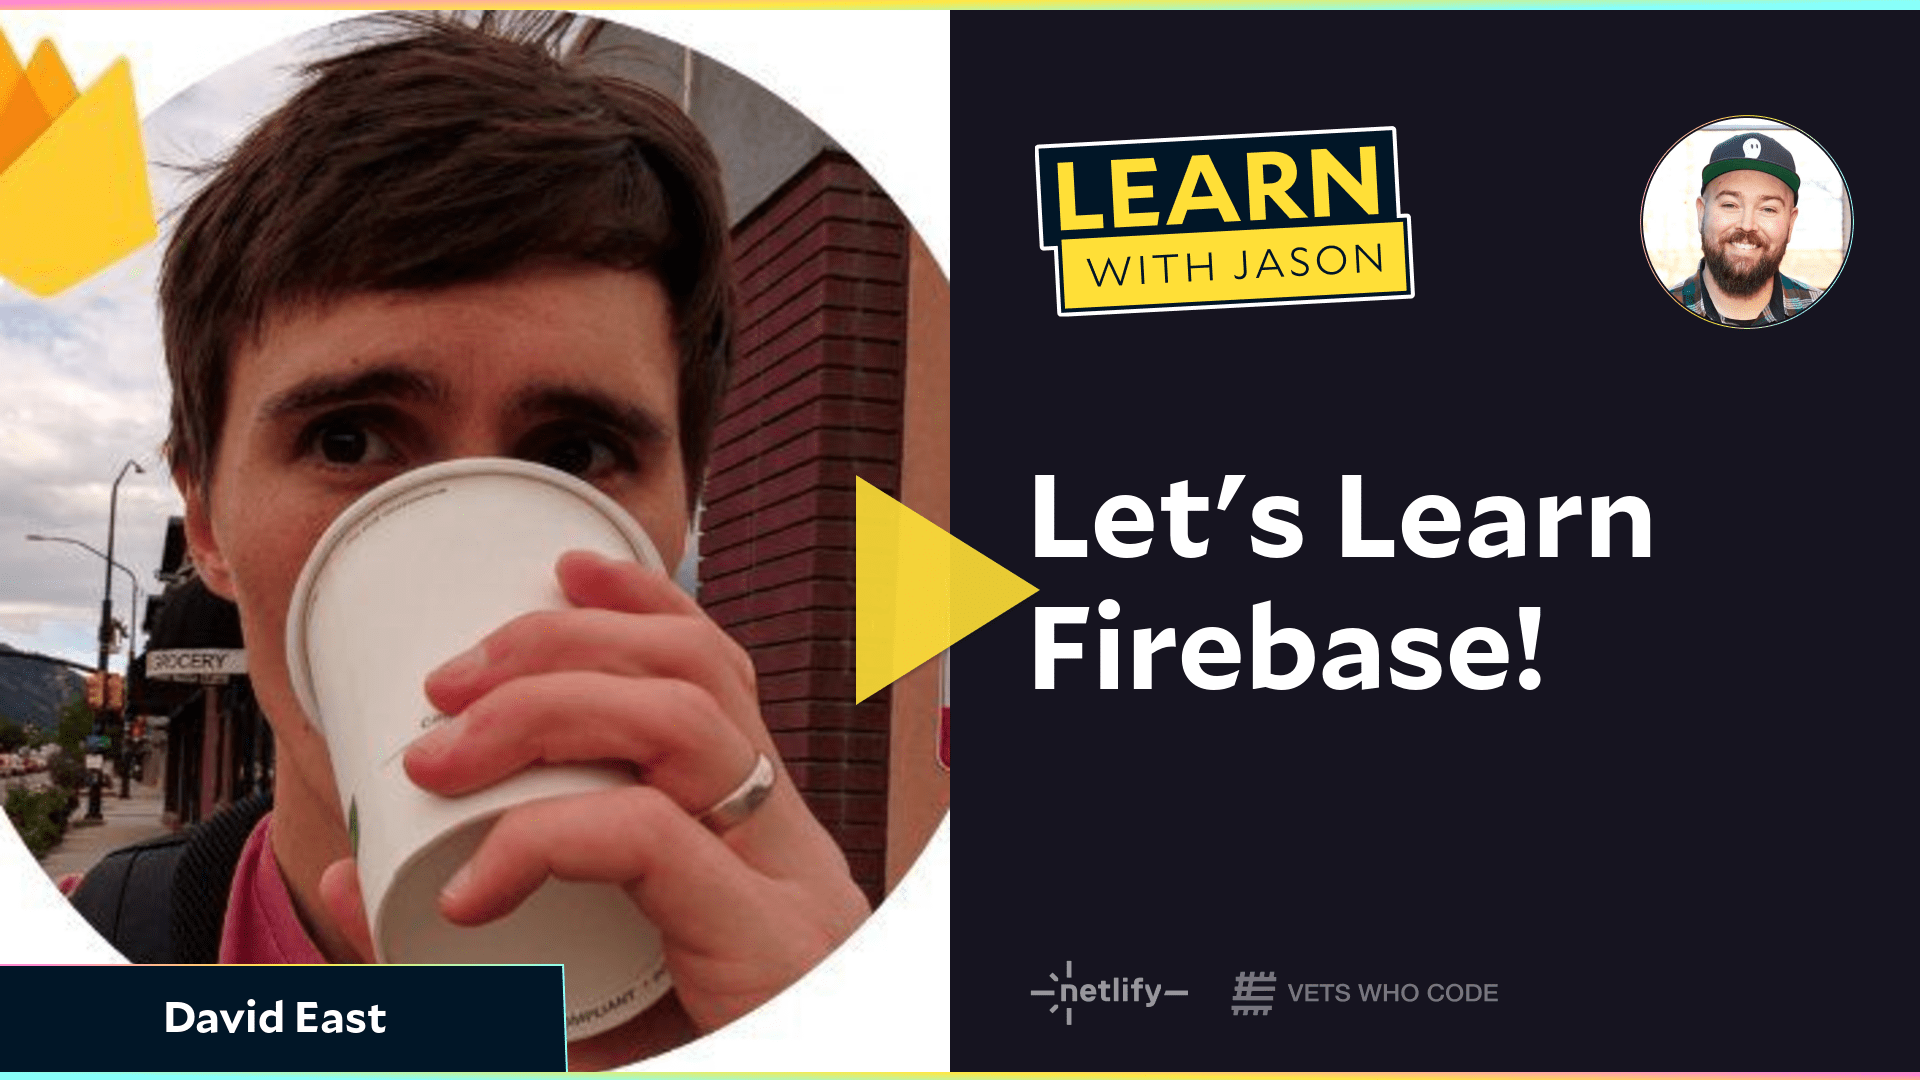 Let's Learn Firebase! (with David East)